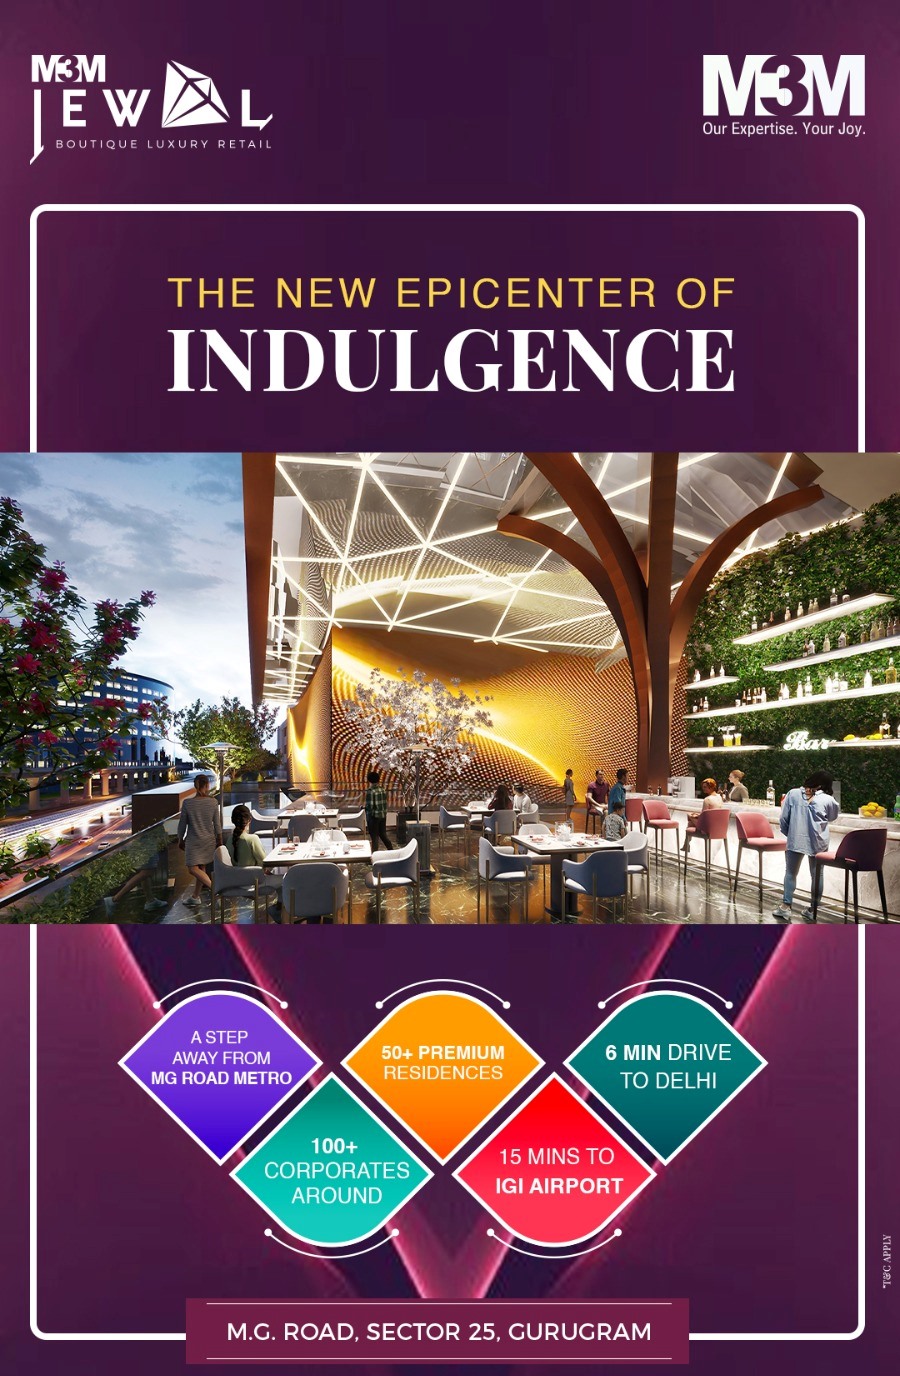 The new epicenter of indulgence at M3M Jewel in Sector 25, Gurgaon Update